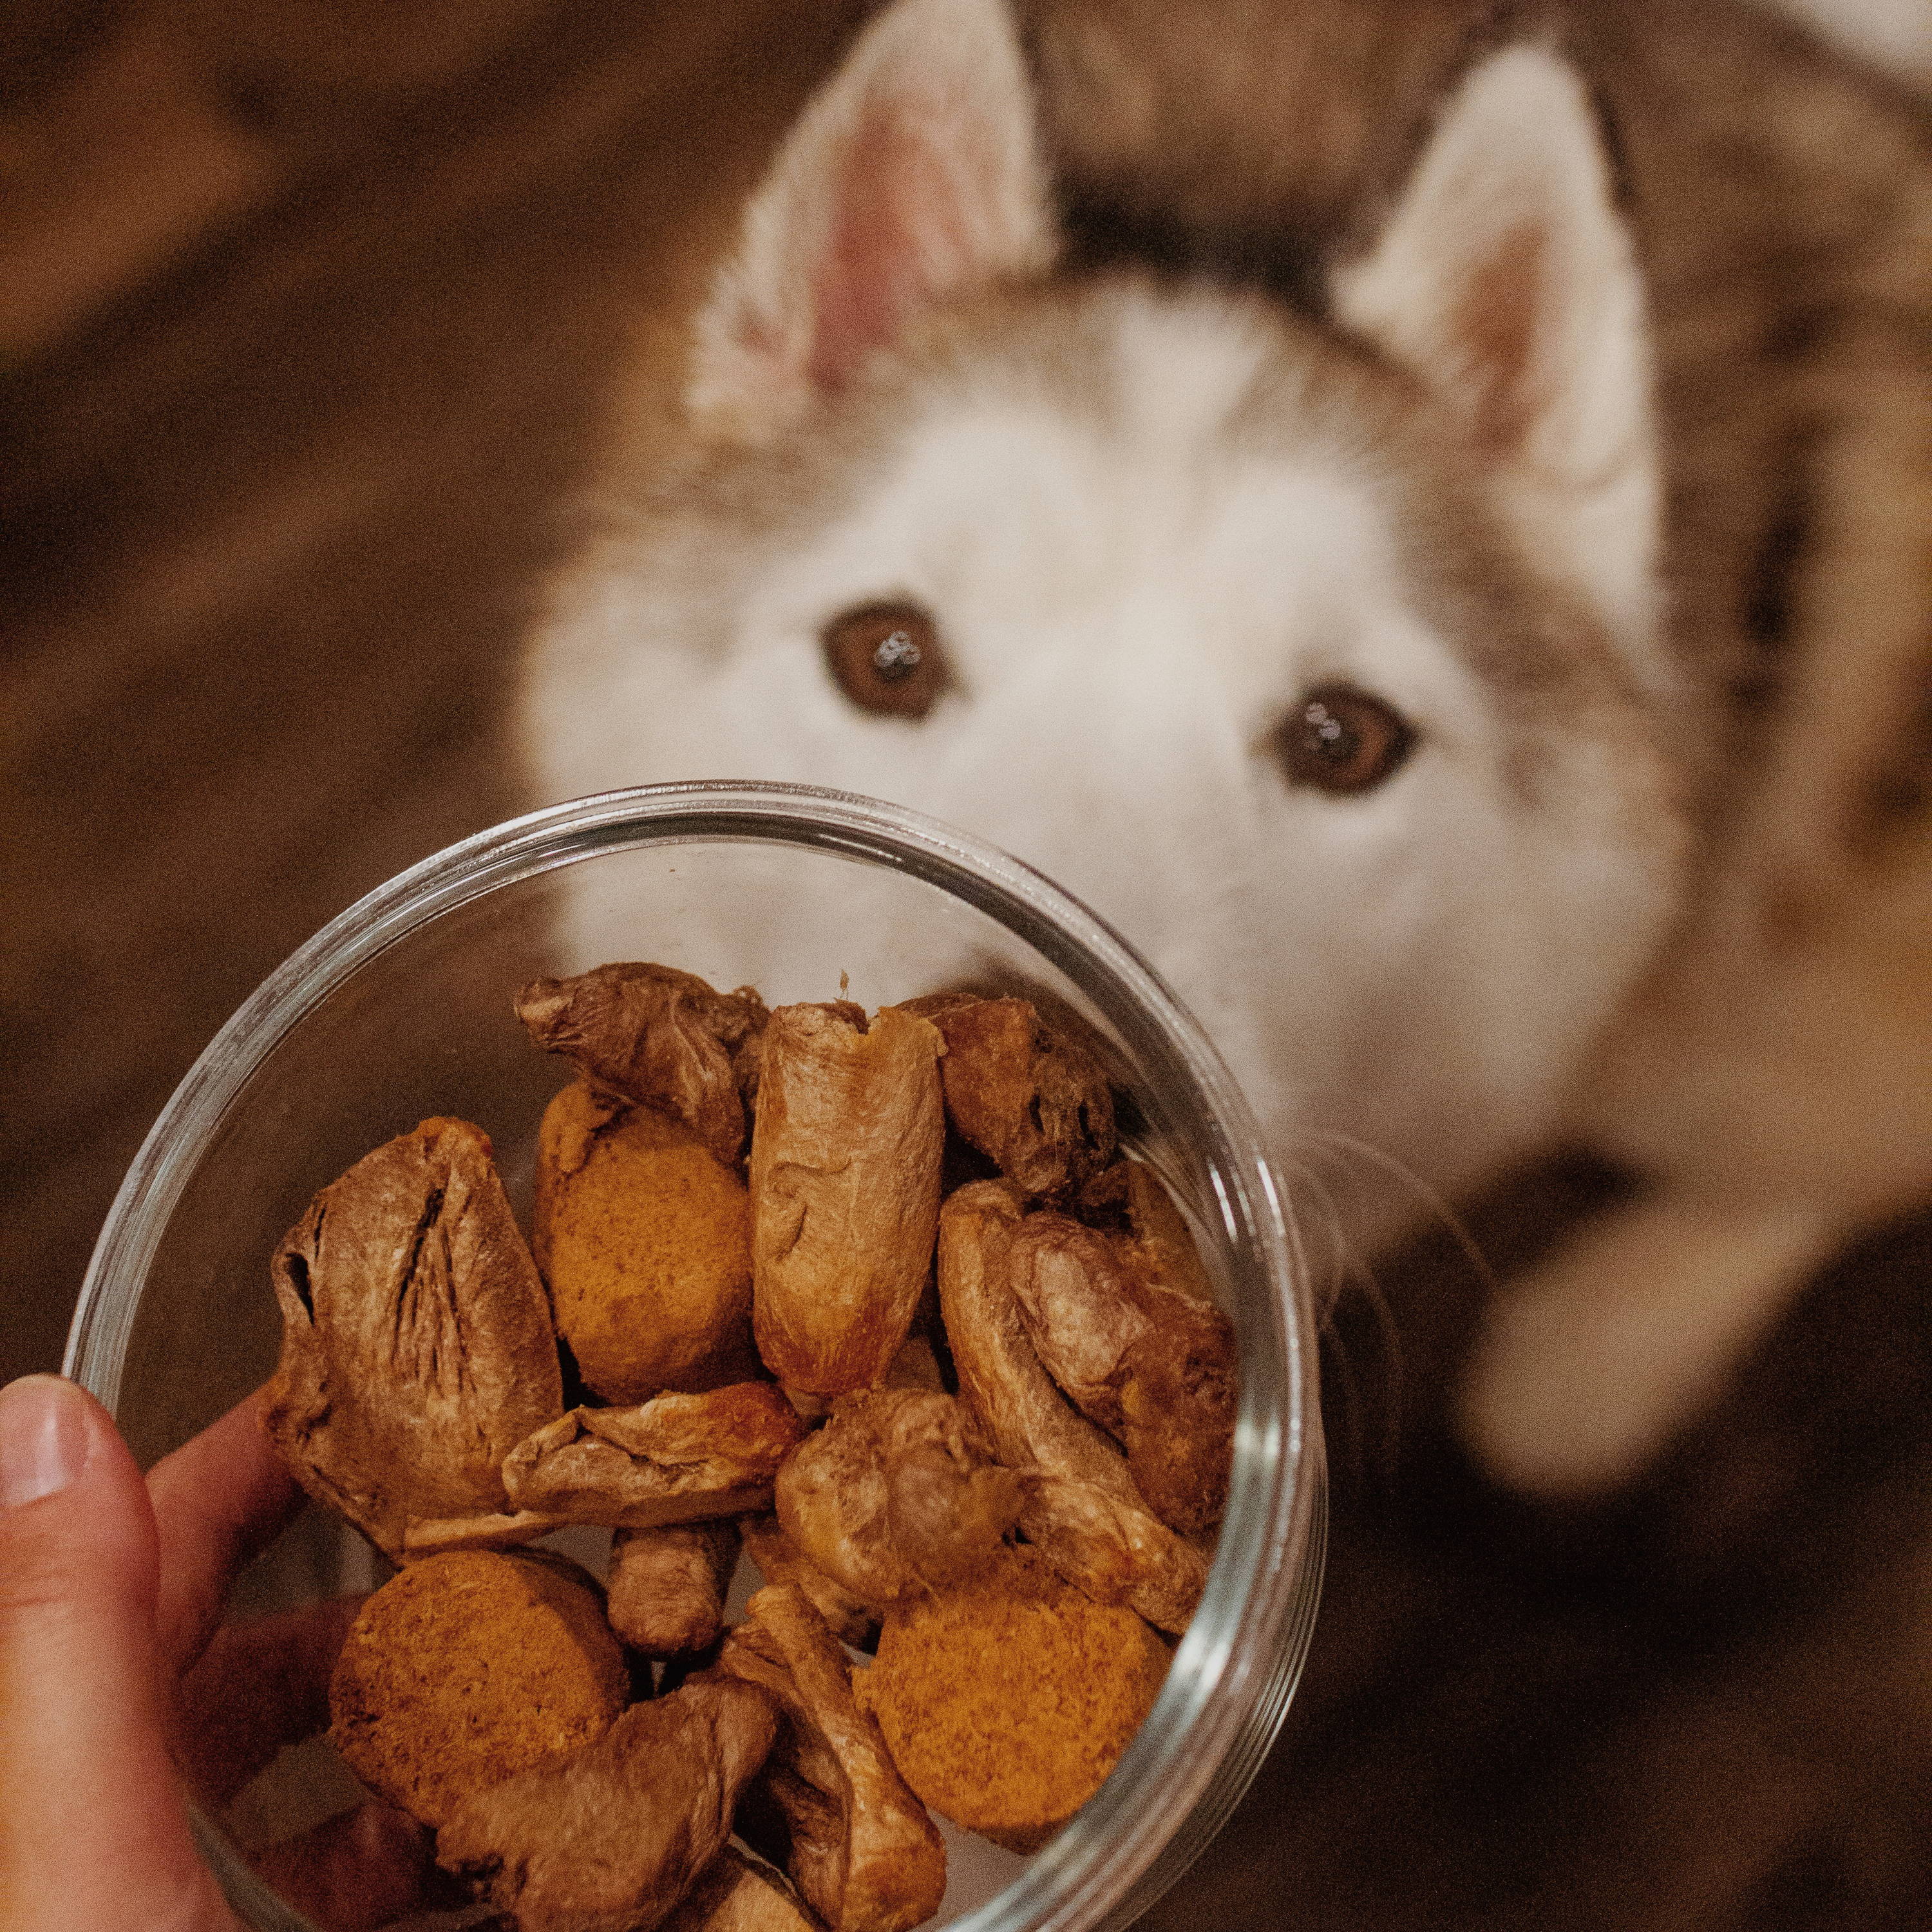 Another angle of a husky behind clear bowl filled with Oma's Pride Heart Medley.